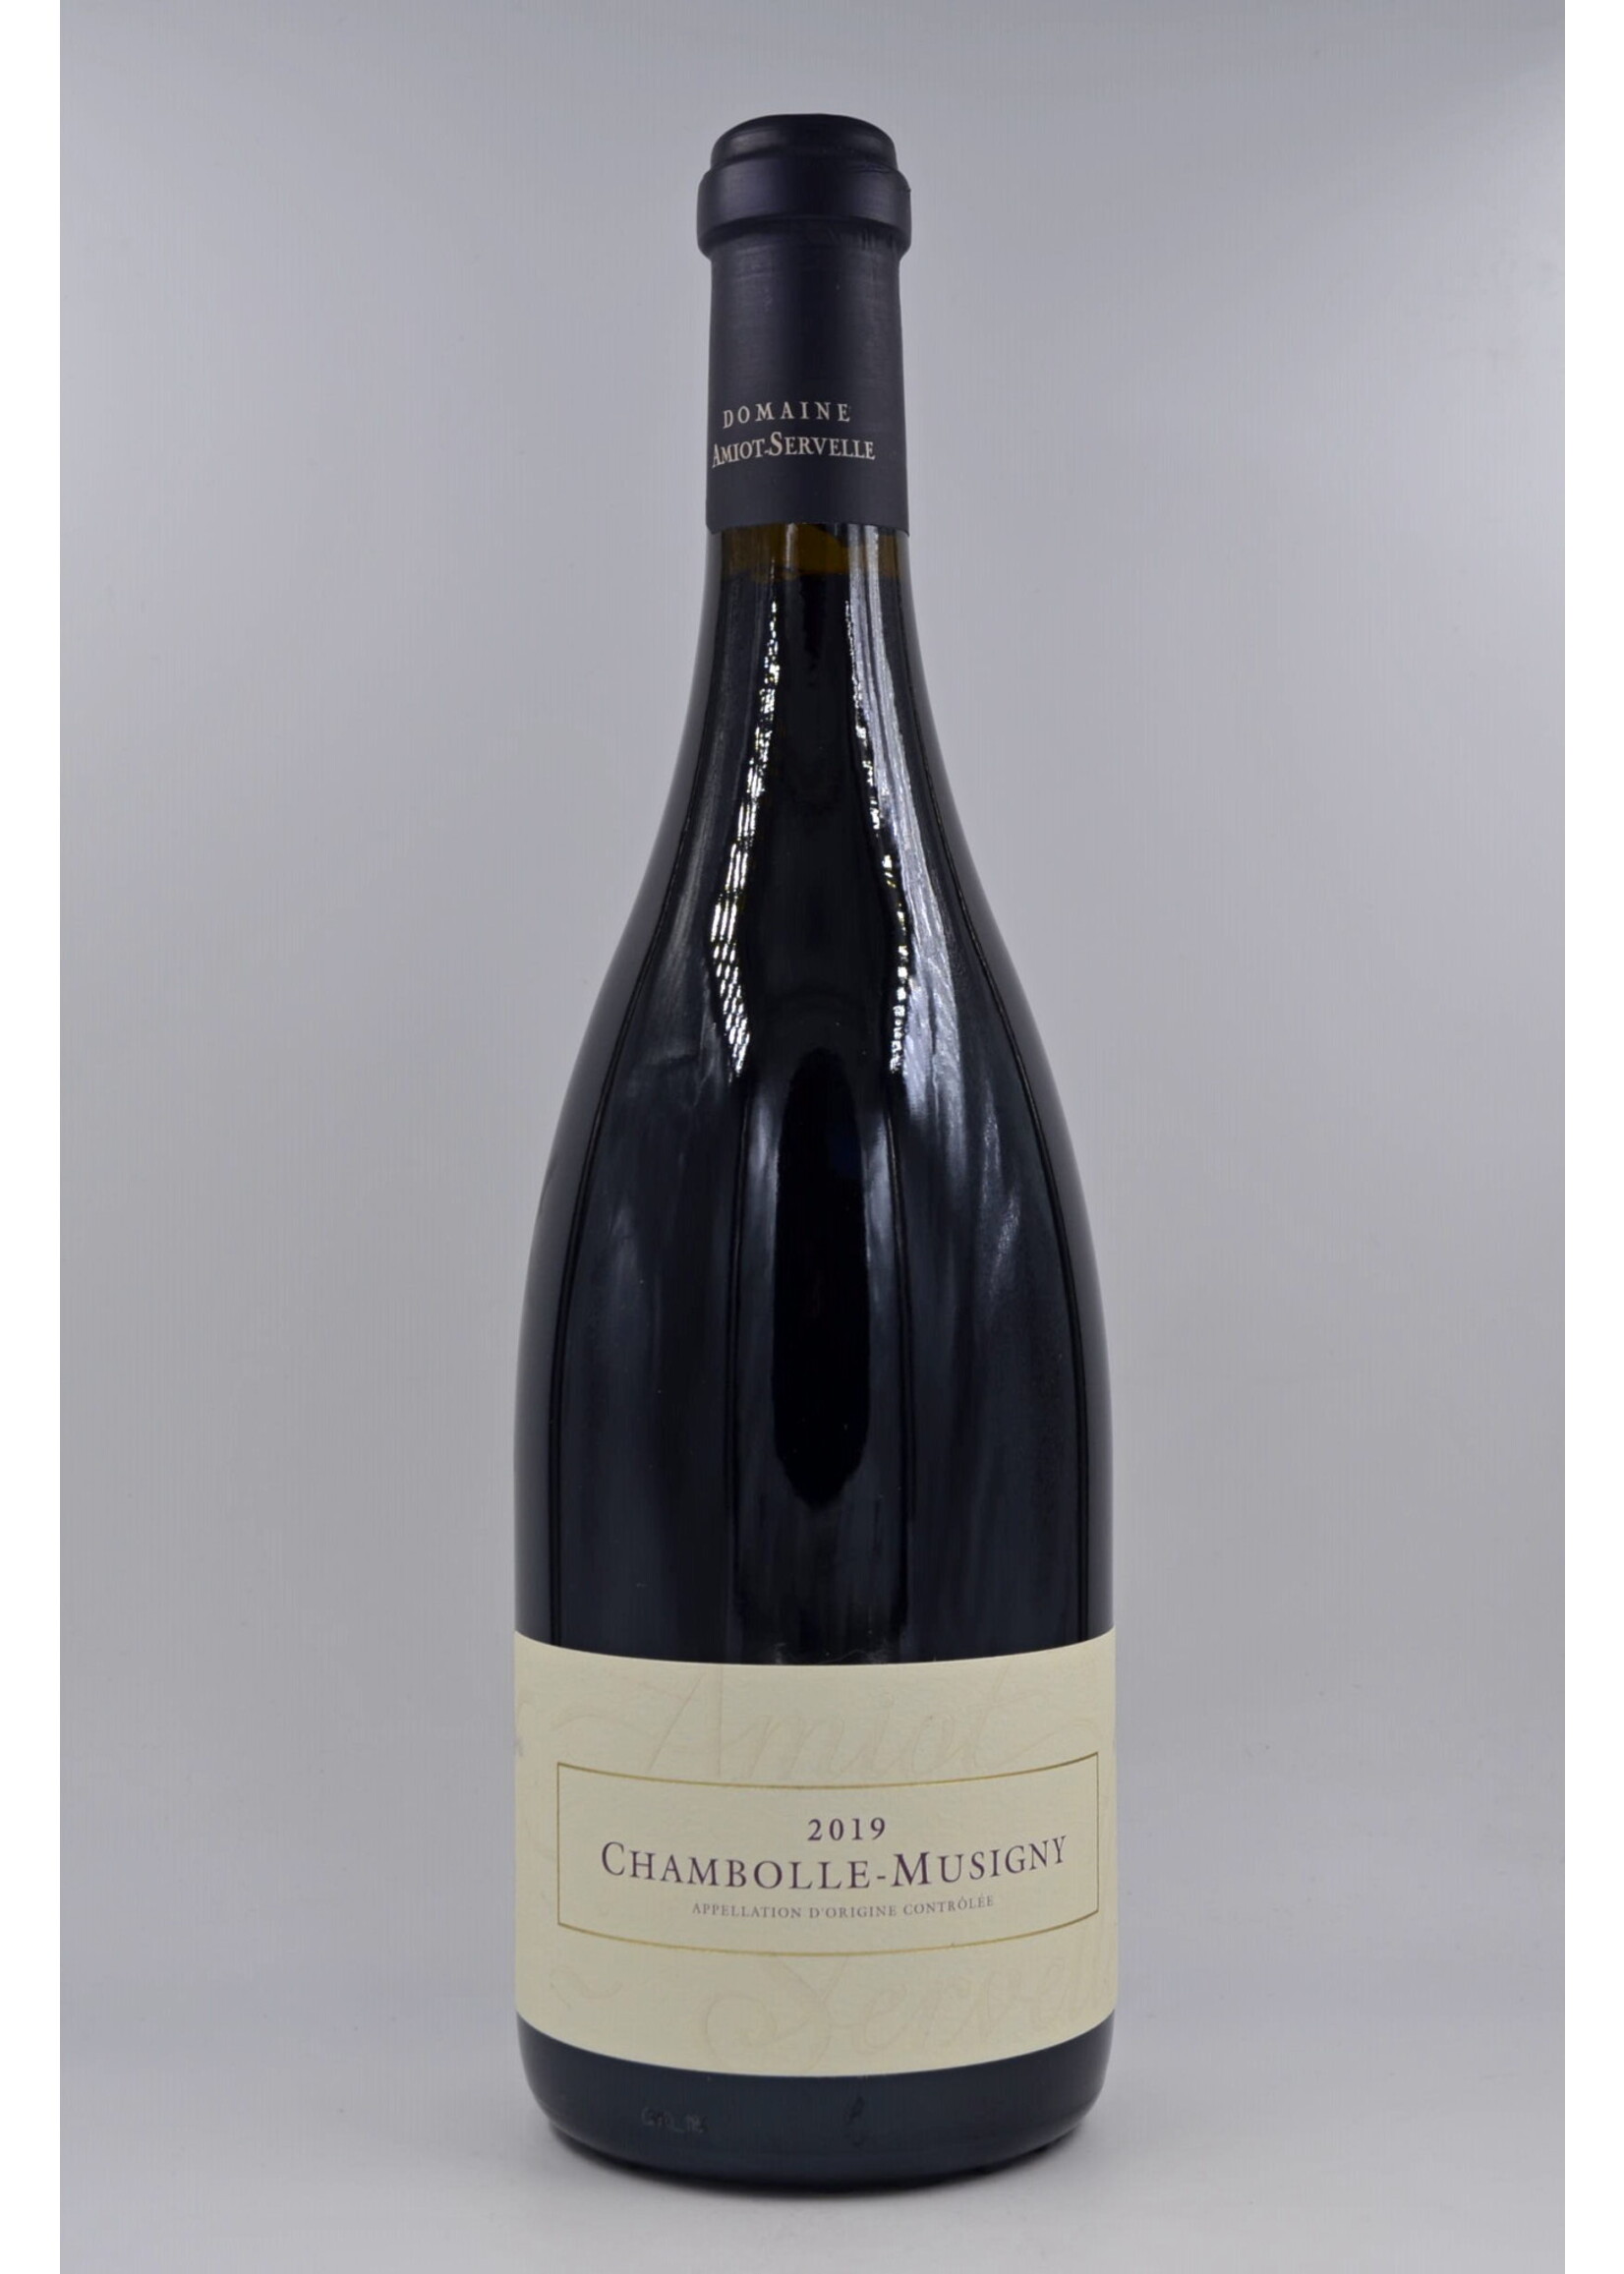 2019 Chambolle Musigny Amiot Servelle